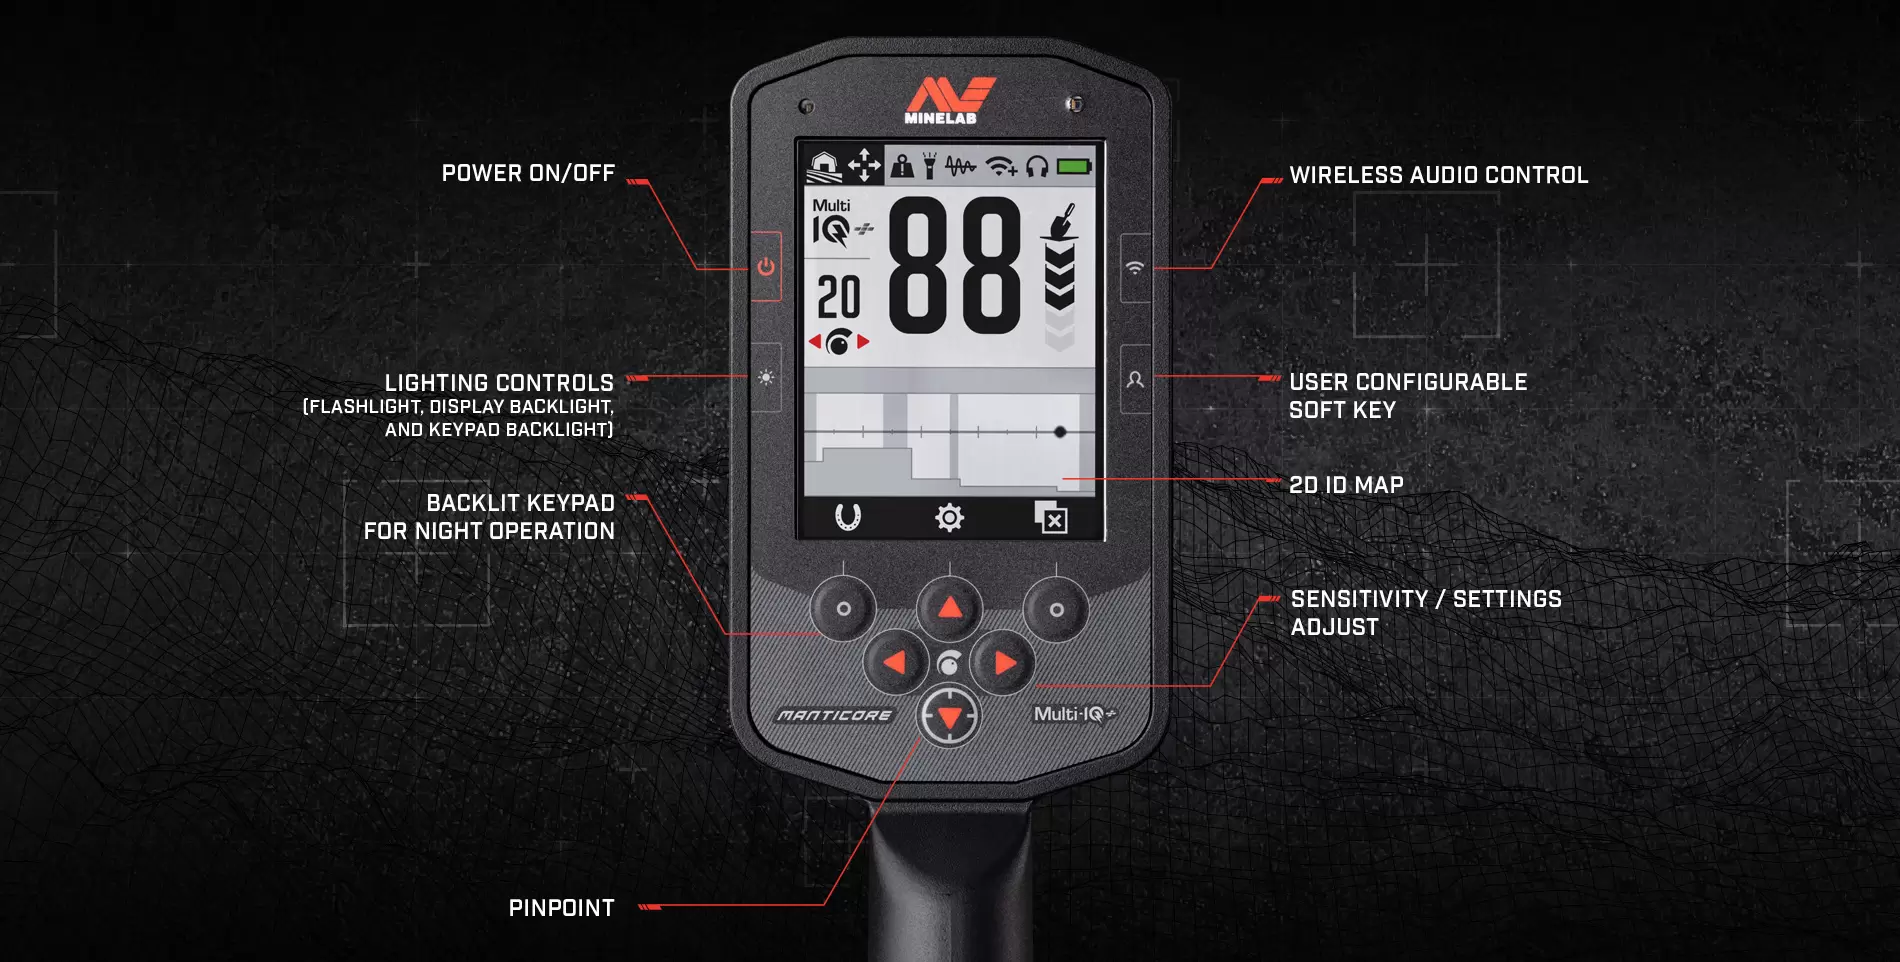 The Manticore…a new offering from Minelab